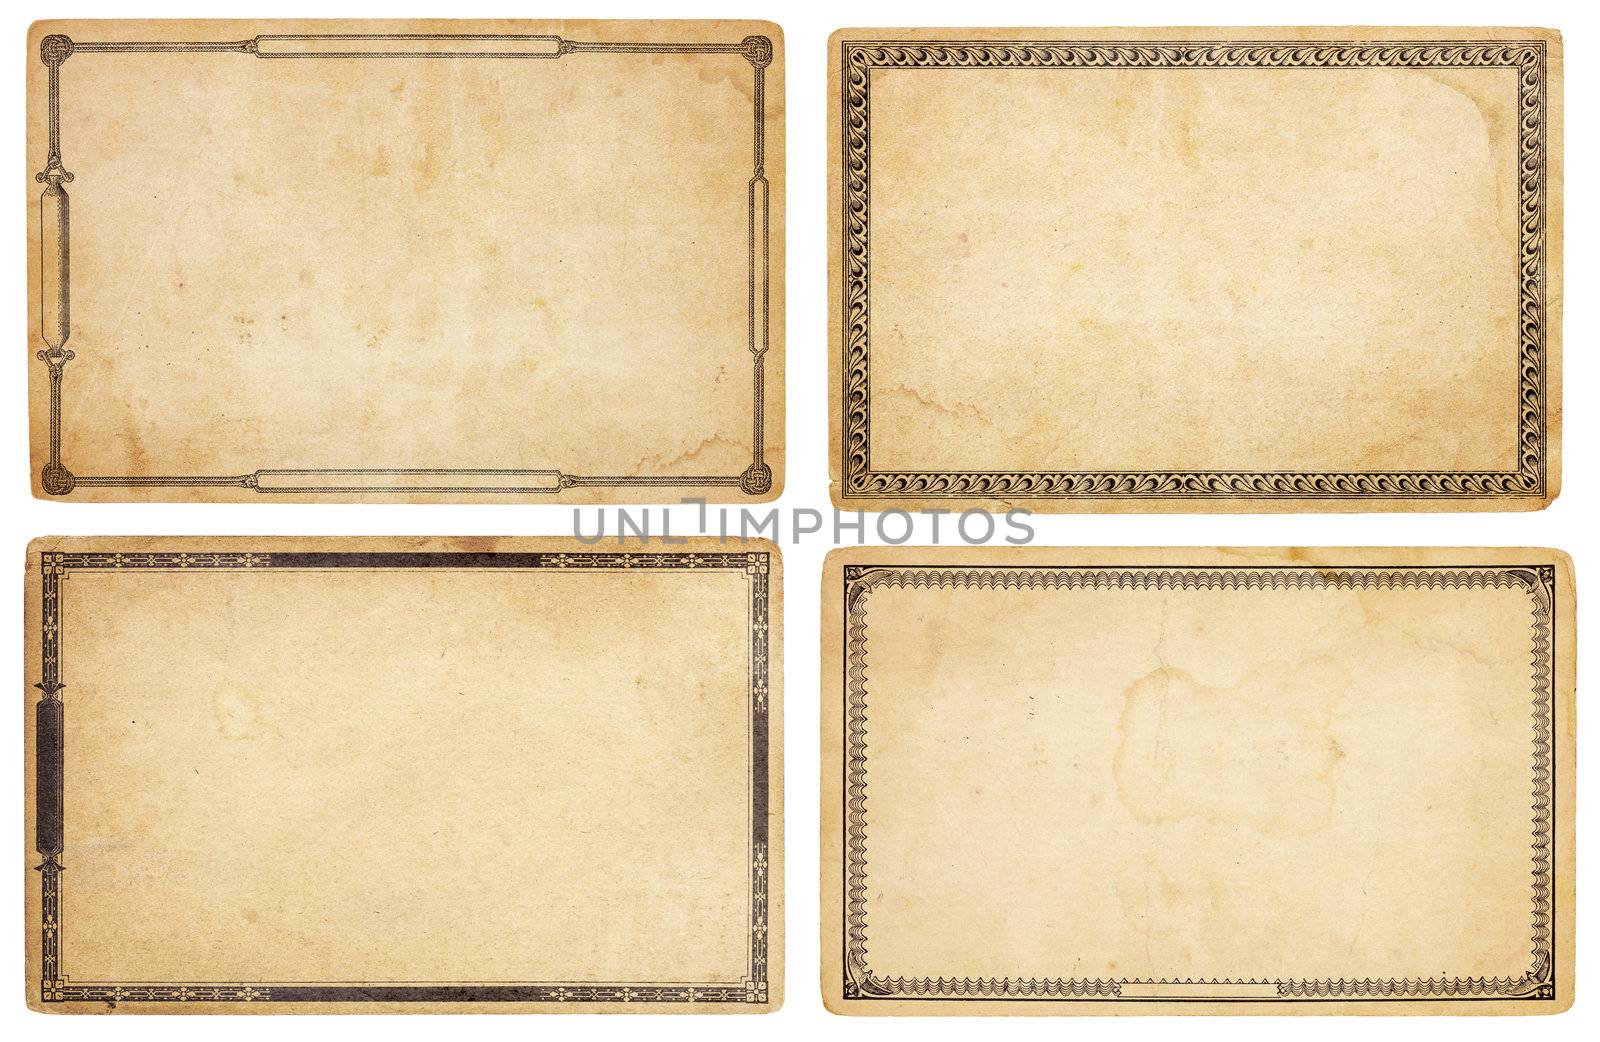 A set of four heavily aged, blank cards with stains, creases and tears.  Each card has different, old-fashioned decorative border. Isolated on white. Includes clipping paths.